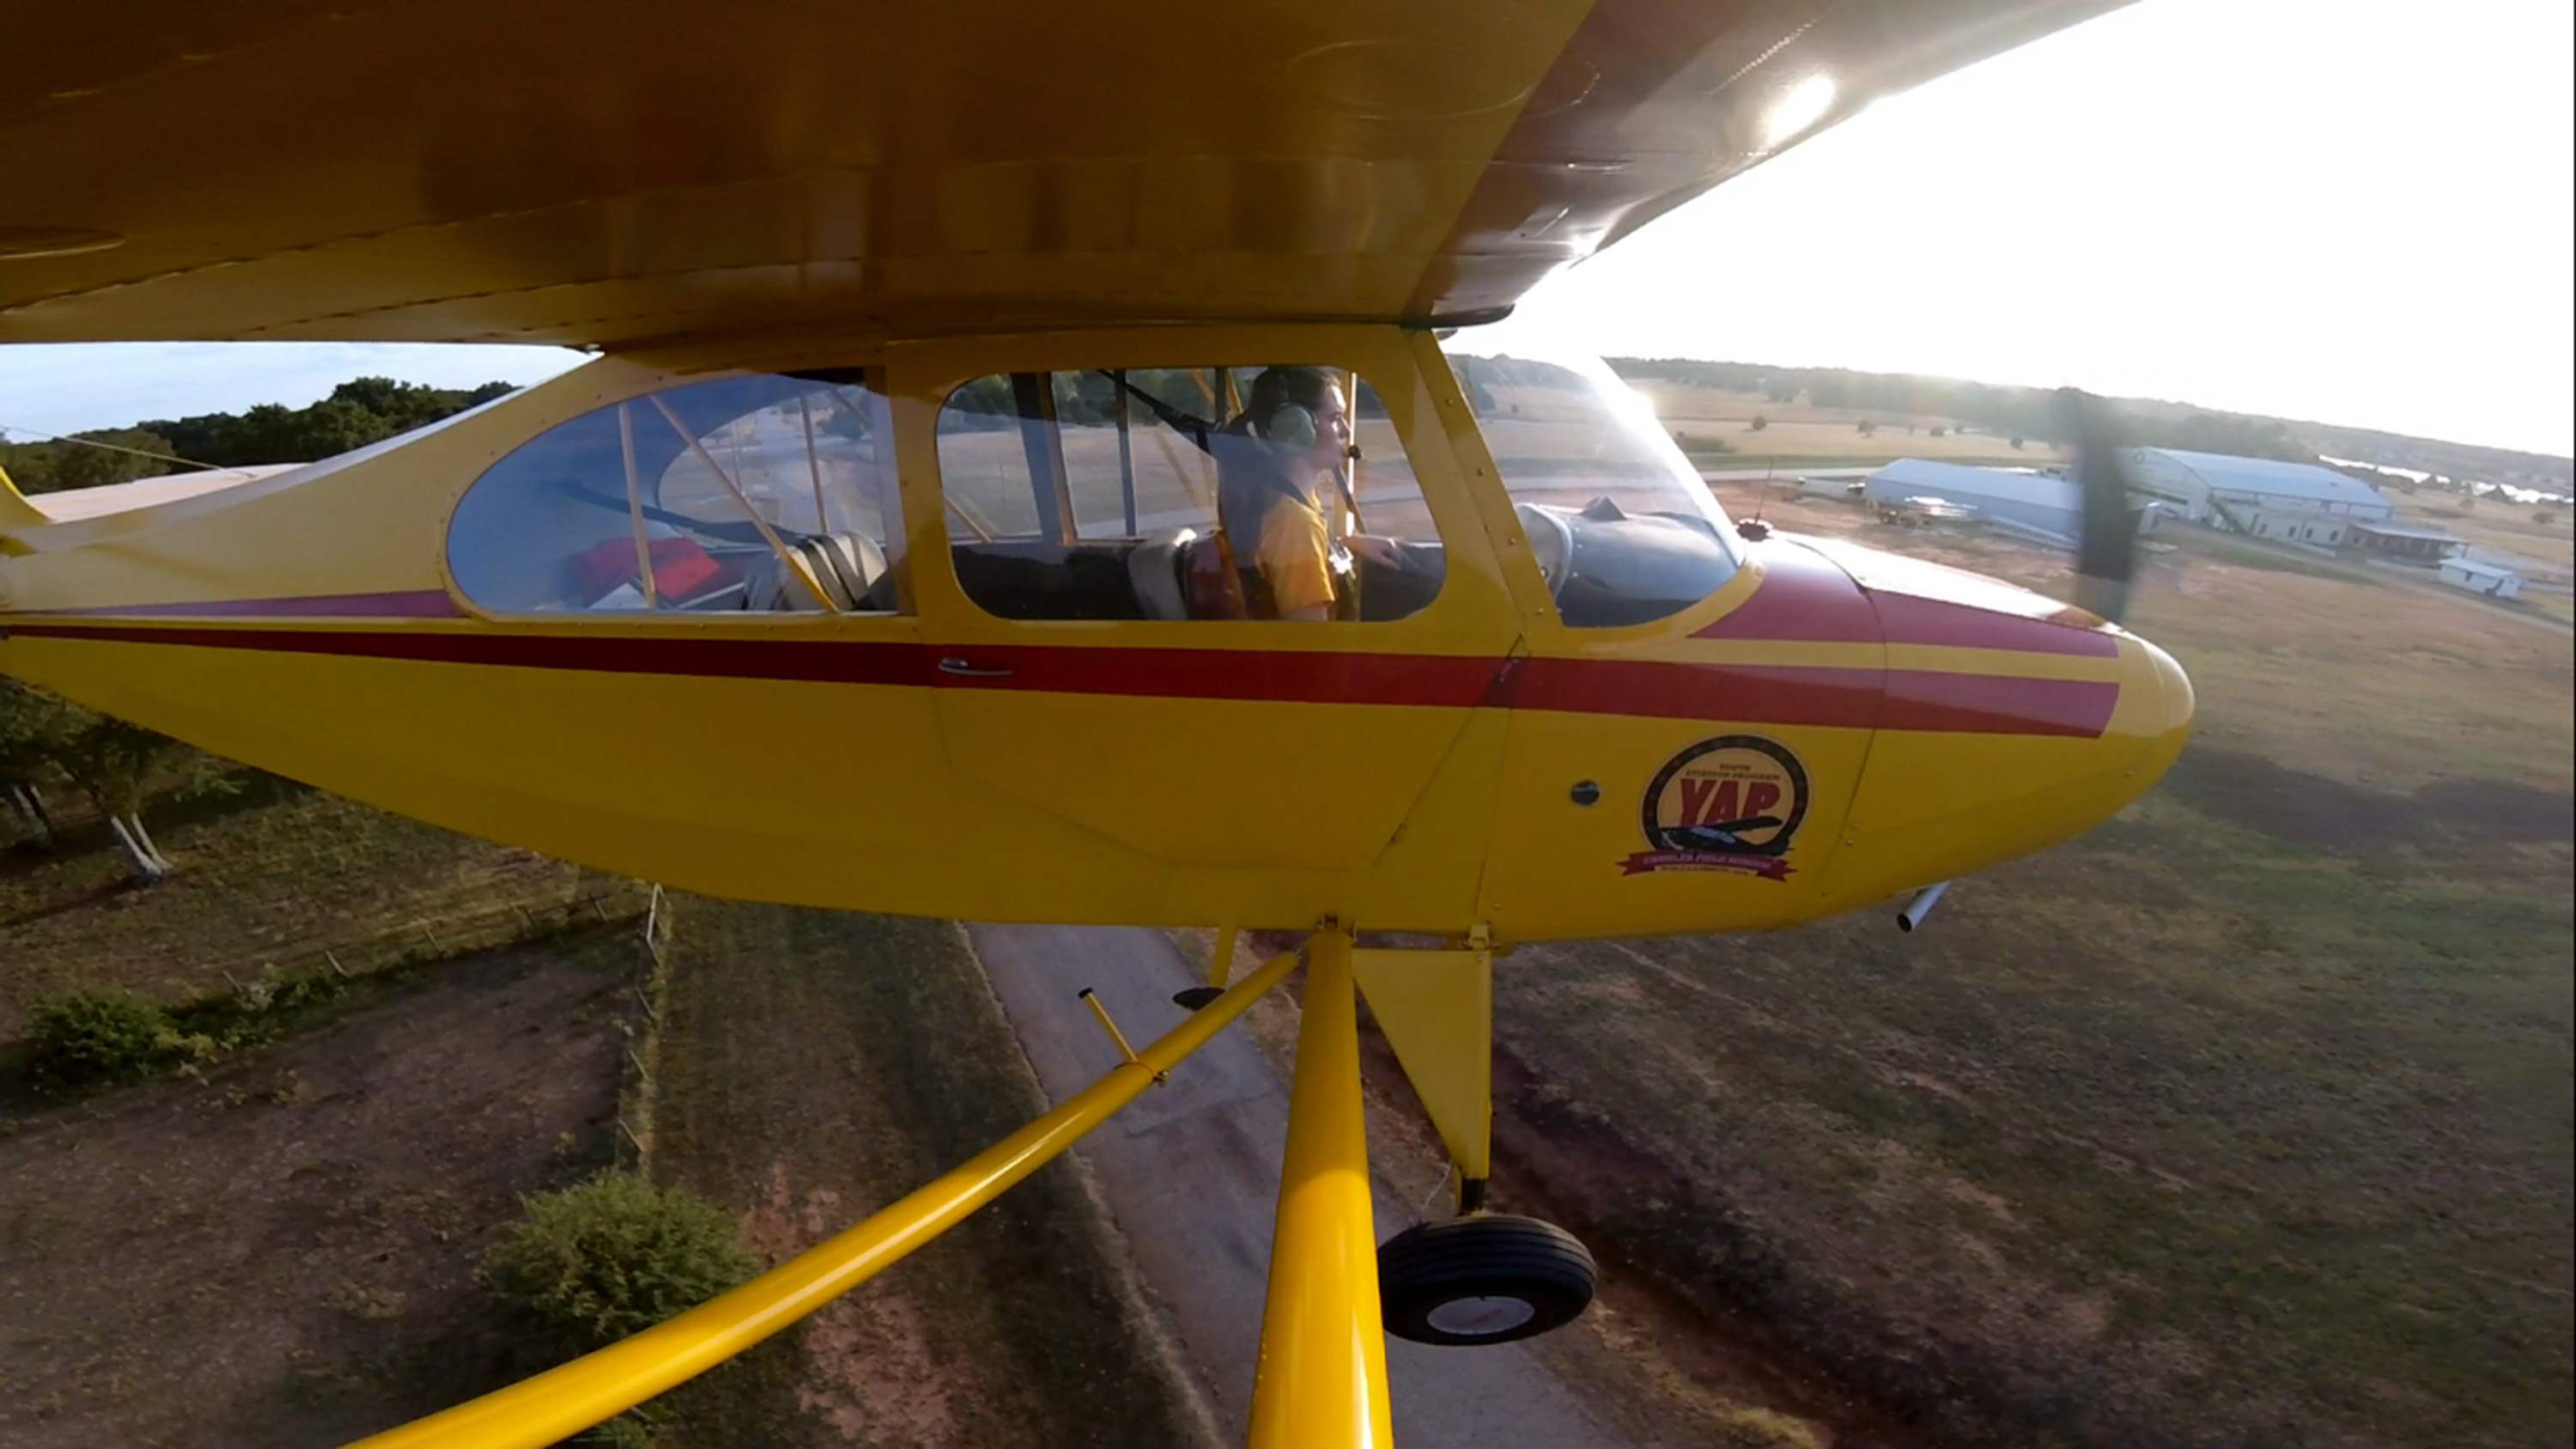 Student pilot Cayla McLeod solos in an Aeronca Champ at Peach State Aerodrome in Williamson, Georgia. Photo courtesy of Cayla McLeod.